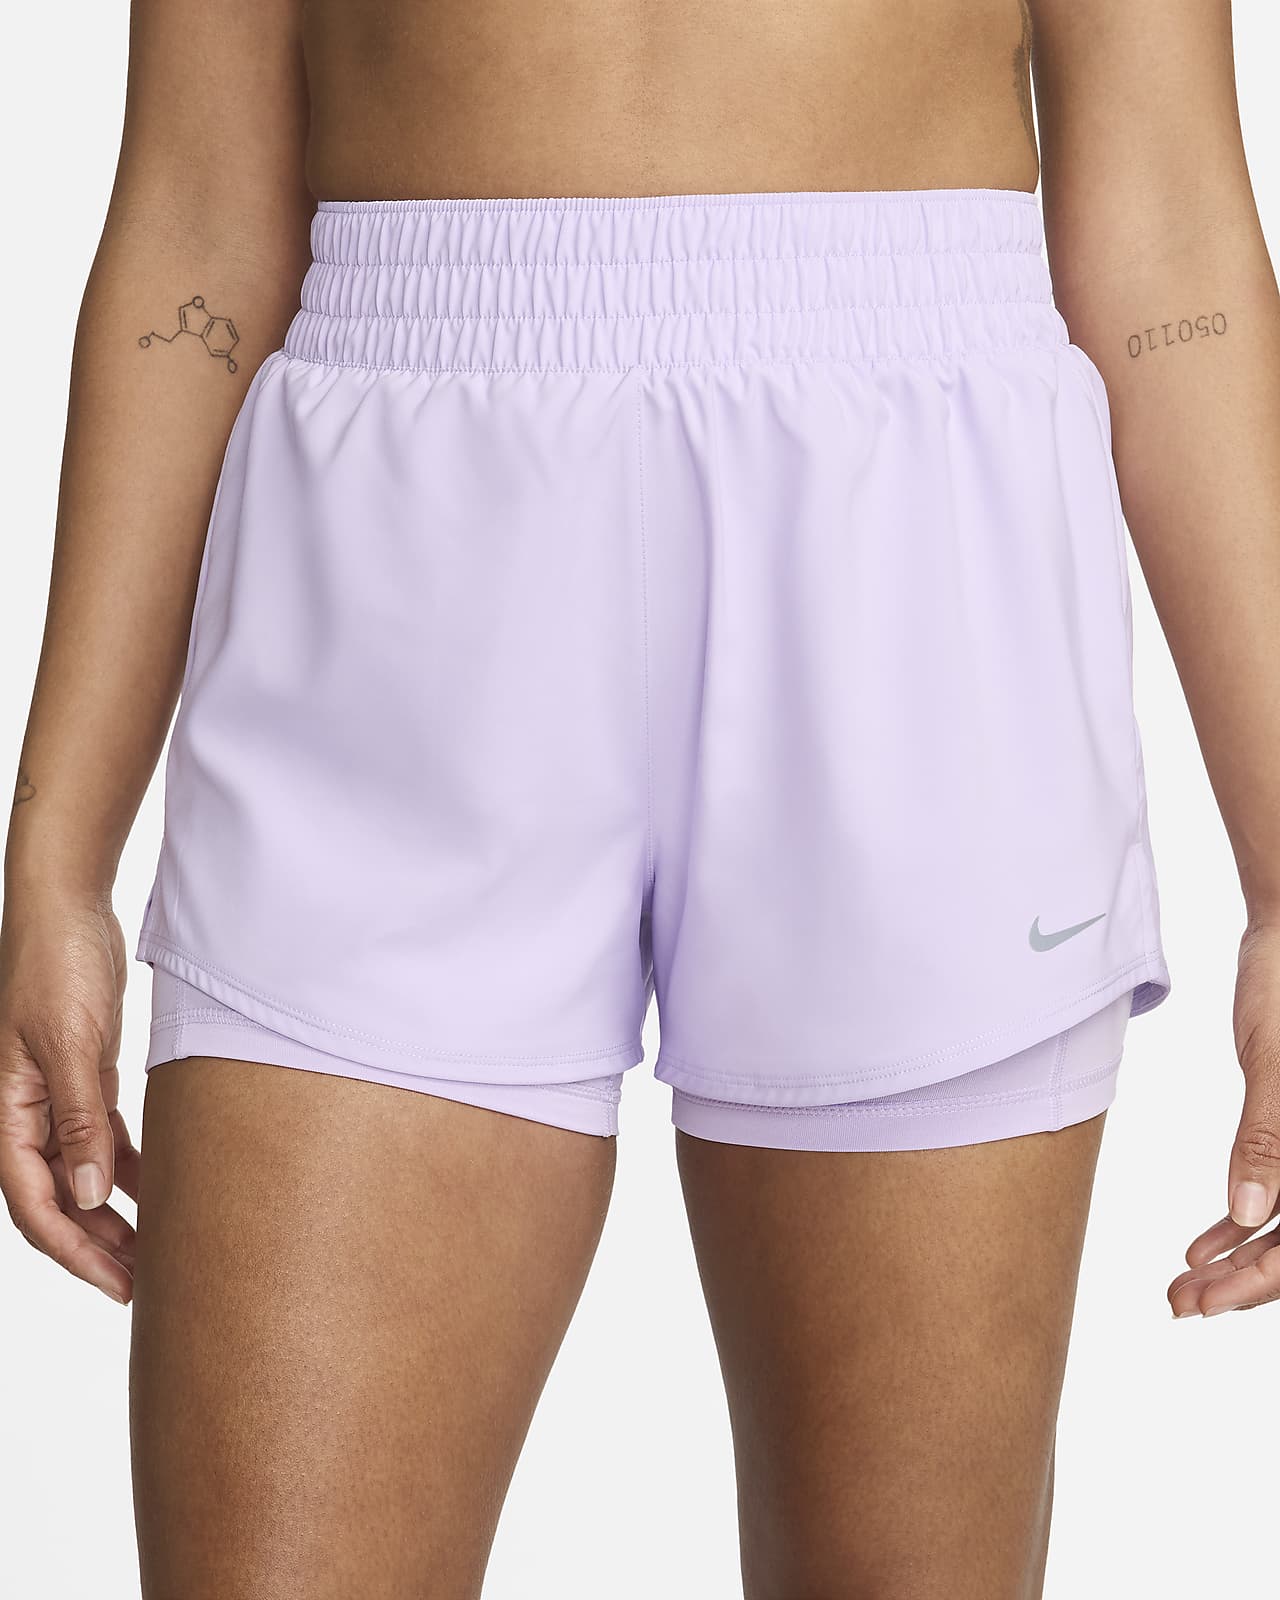 https://static.nike.com/a/images/t_PDP_1280_v1/f_auto,q_auto:eco/abc291be-8d3d-40be-ba72-63ffc3c6e1df/one-womens-dri-fit-high-waisted-3-2-in-1-shorts-BW8GCl.png